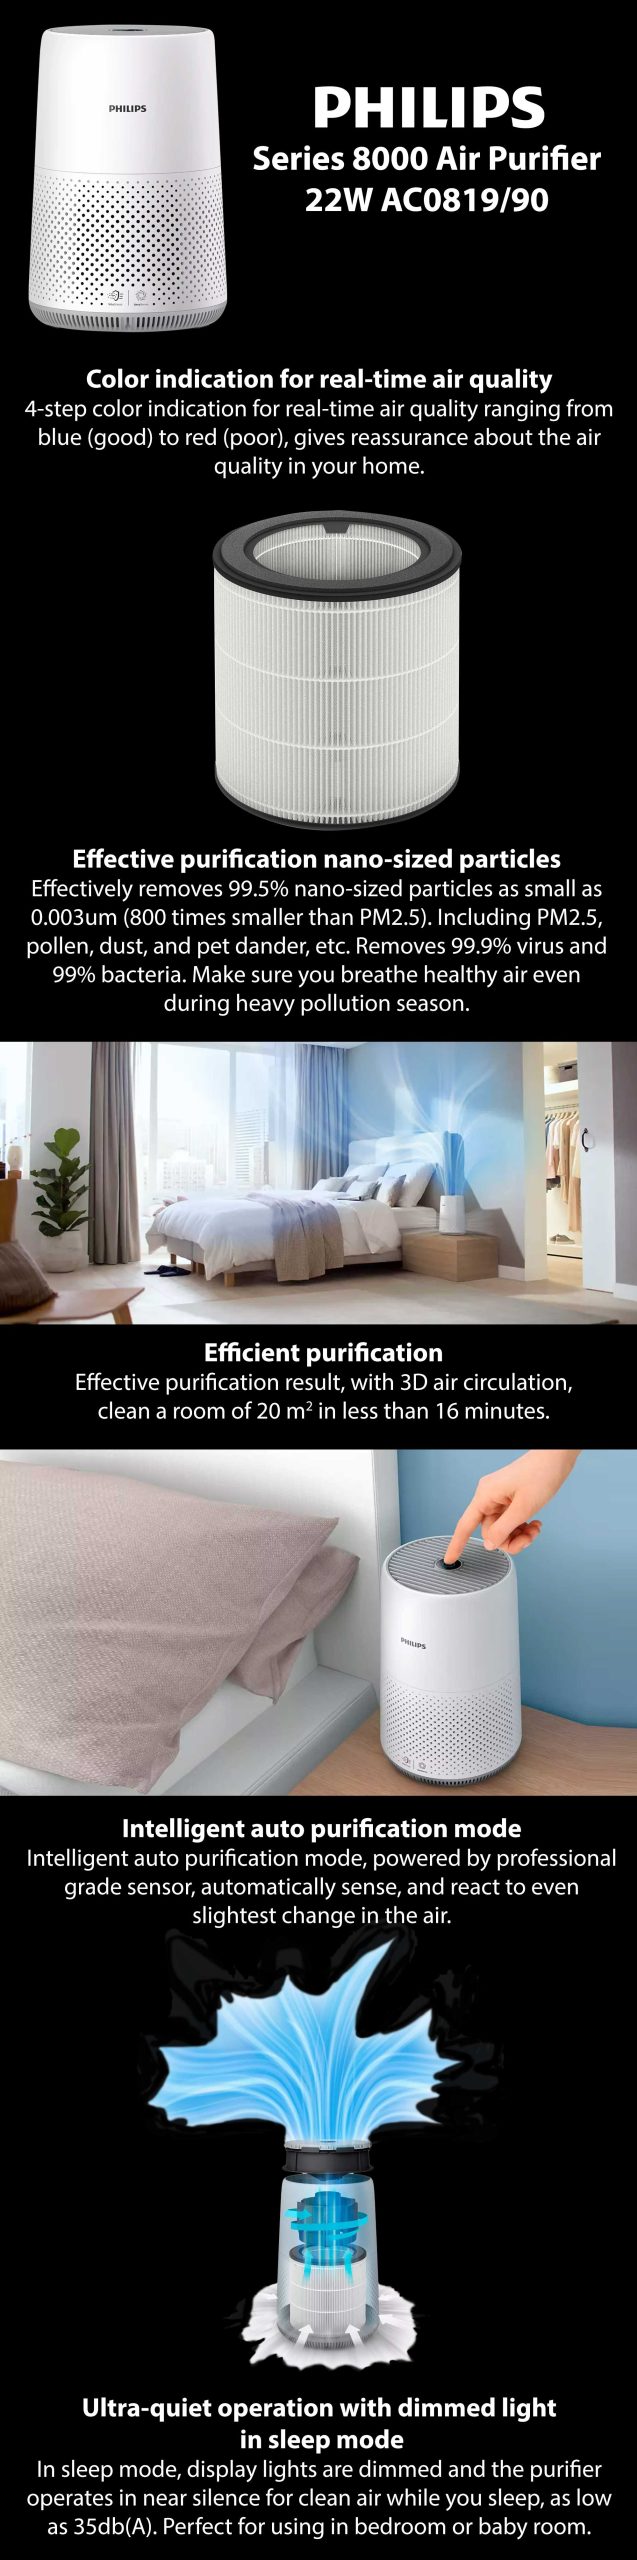 Real-time air quality colour indicator Effective purification of nanoparticles Intelligent auto purification mode; Ultra-quiet operation with dim light in sleep mode Cleans a room of 20 square meters in less than 16 minutes Filter to be used with is FY0194/30